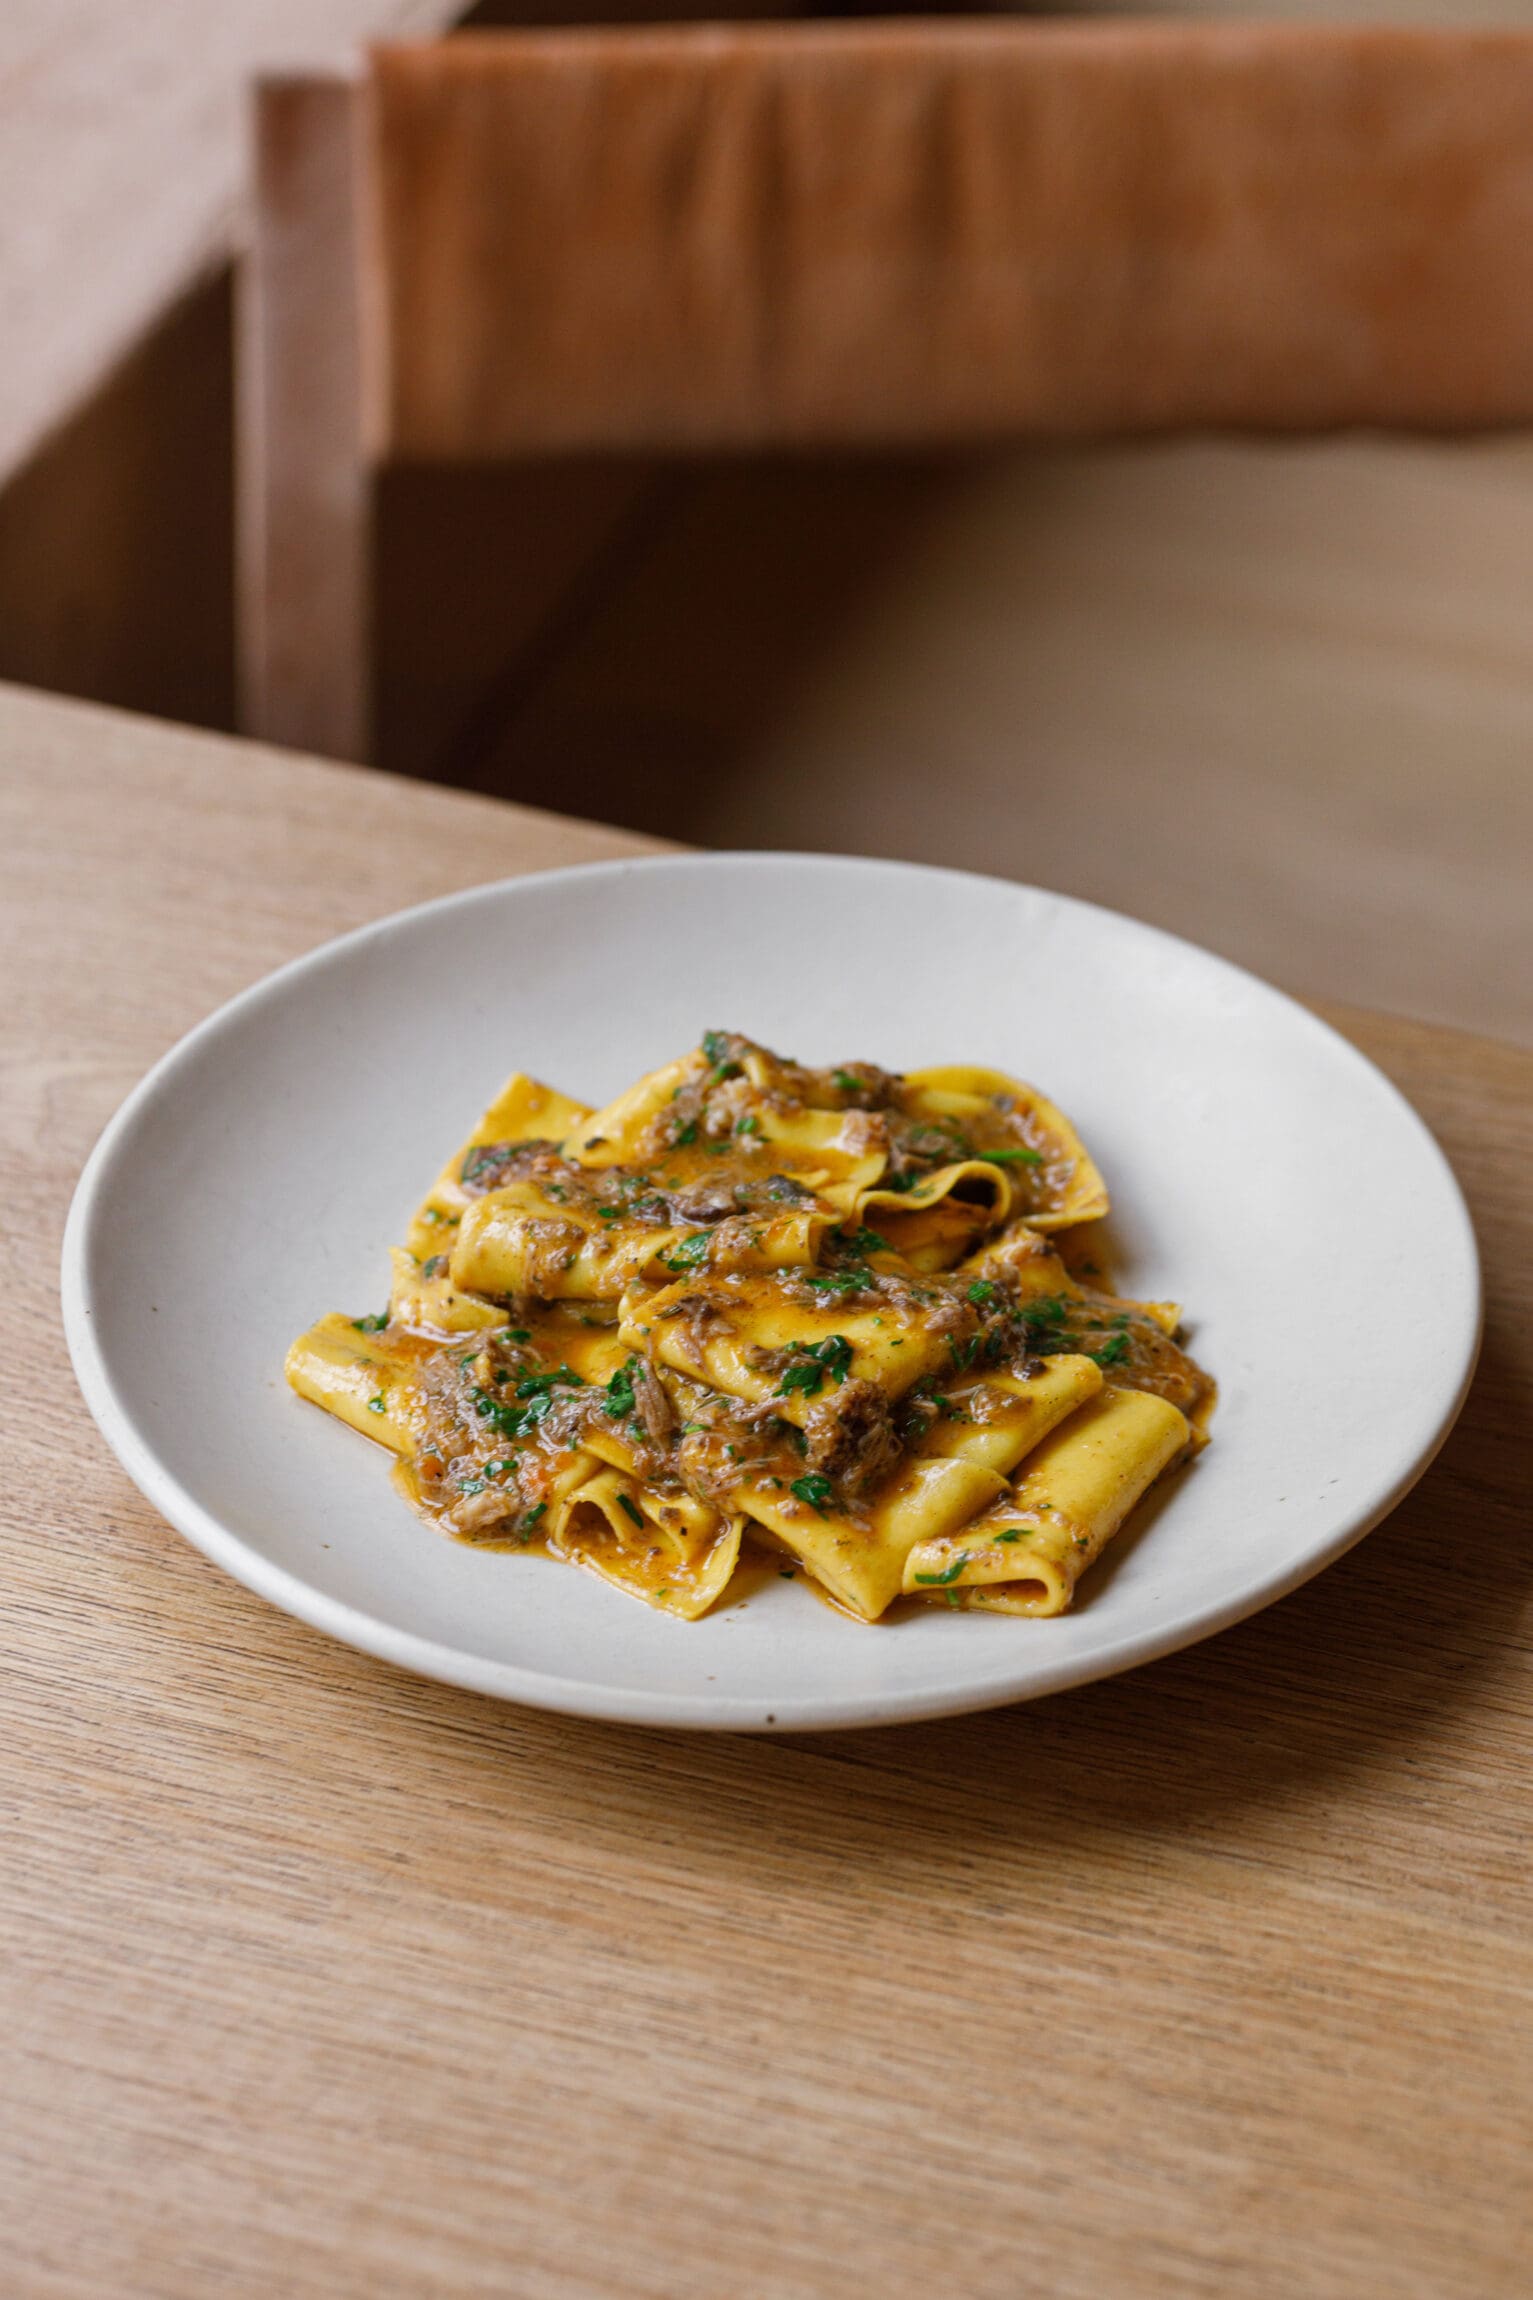 The best restaurants in London | Fazzoletti with duck ragu served at Manteca